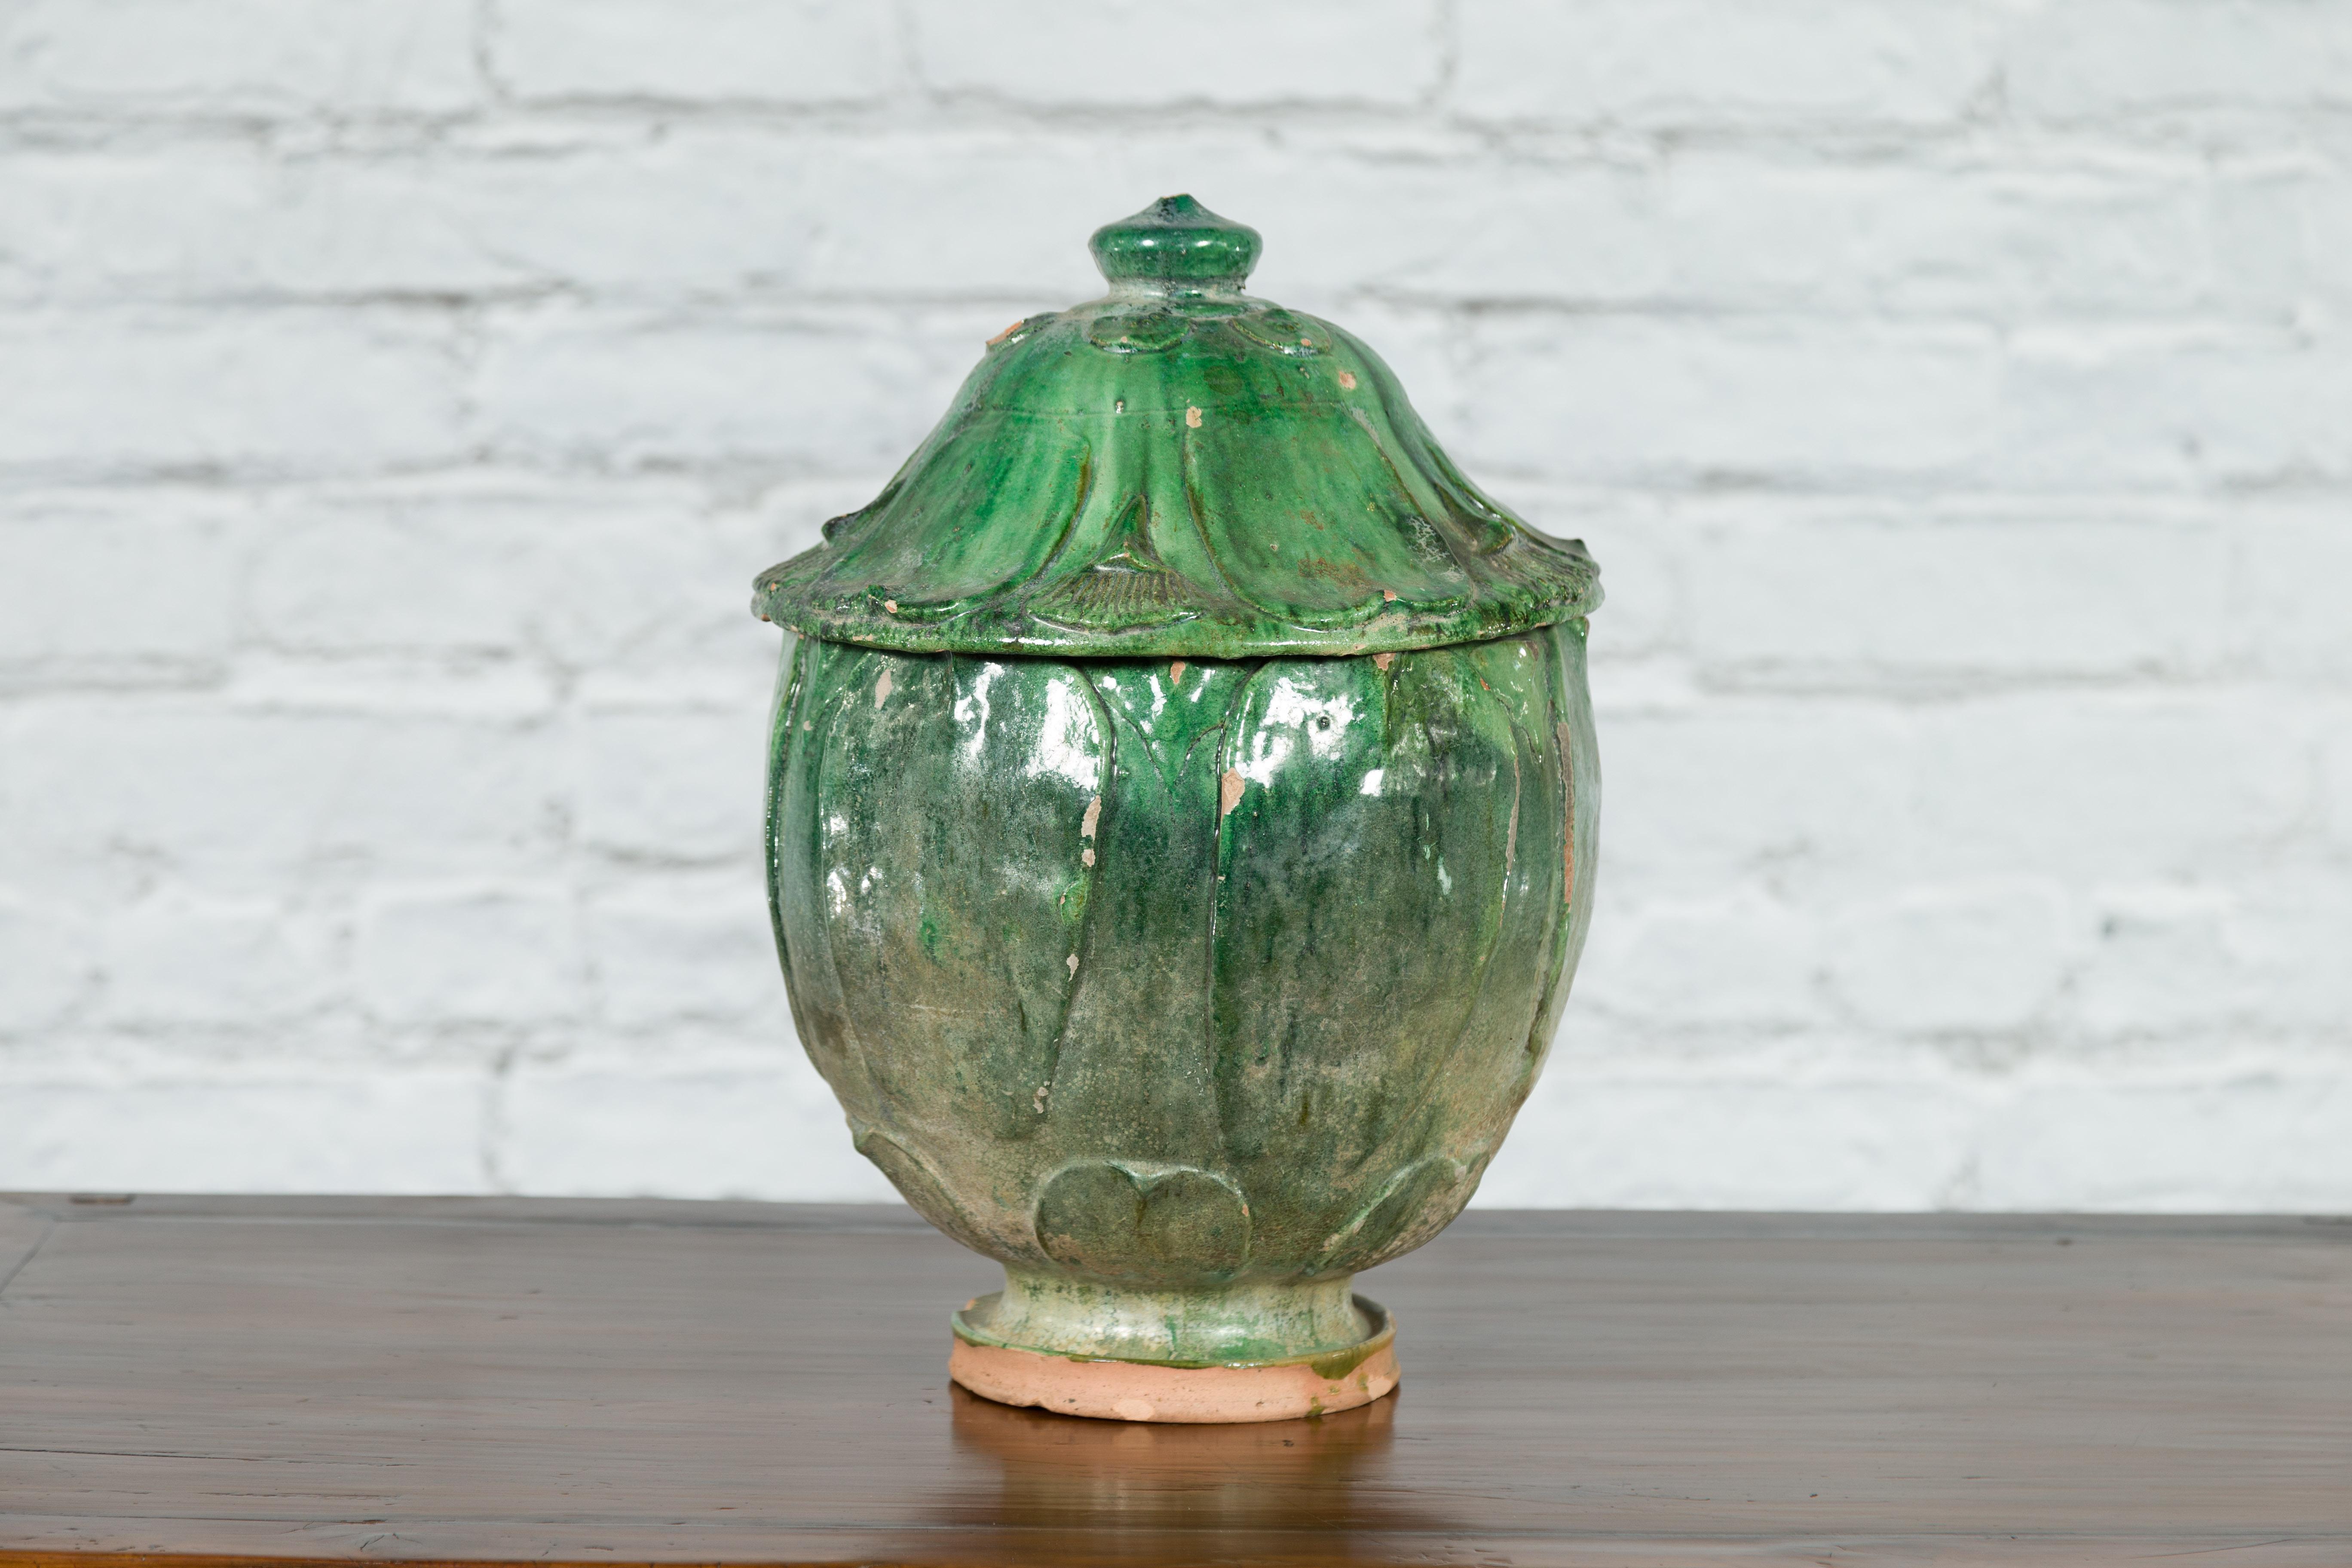 A Chinese Qing Dynasty period green glazed terracotta jar from the 18th century or earlier, with lotus design, lid and nicely distressed appearance. Created in China during the Qing Dynasty in the 18th century or at an even earlier time, this